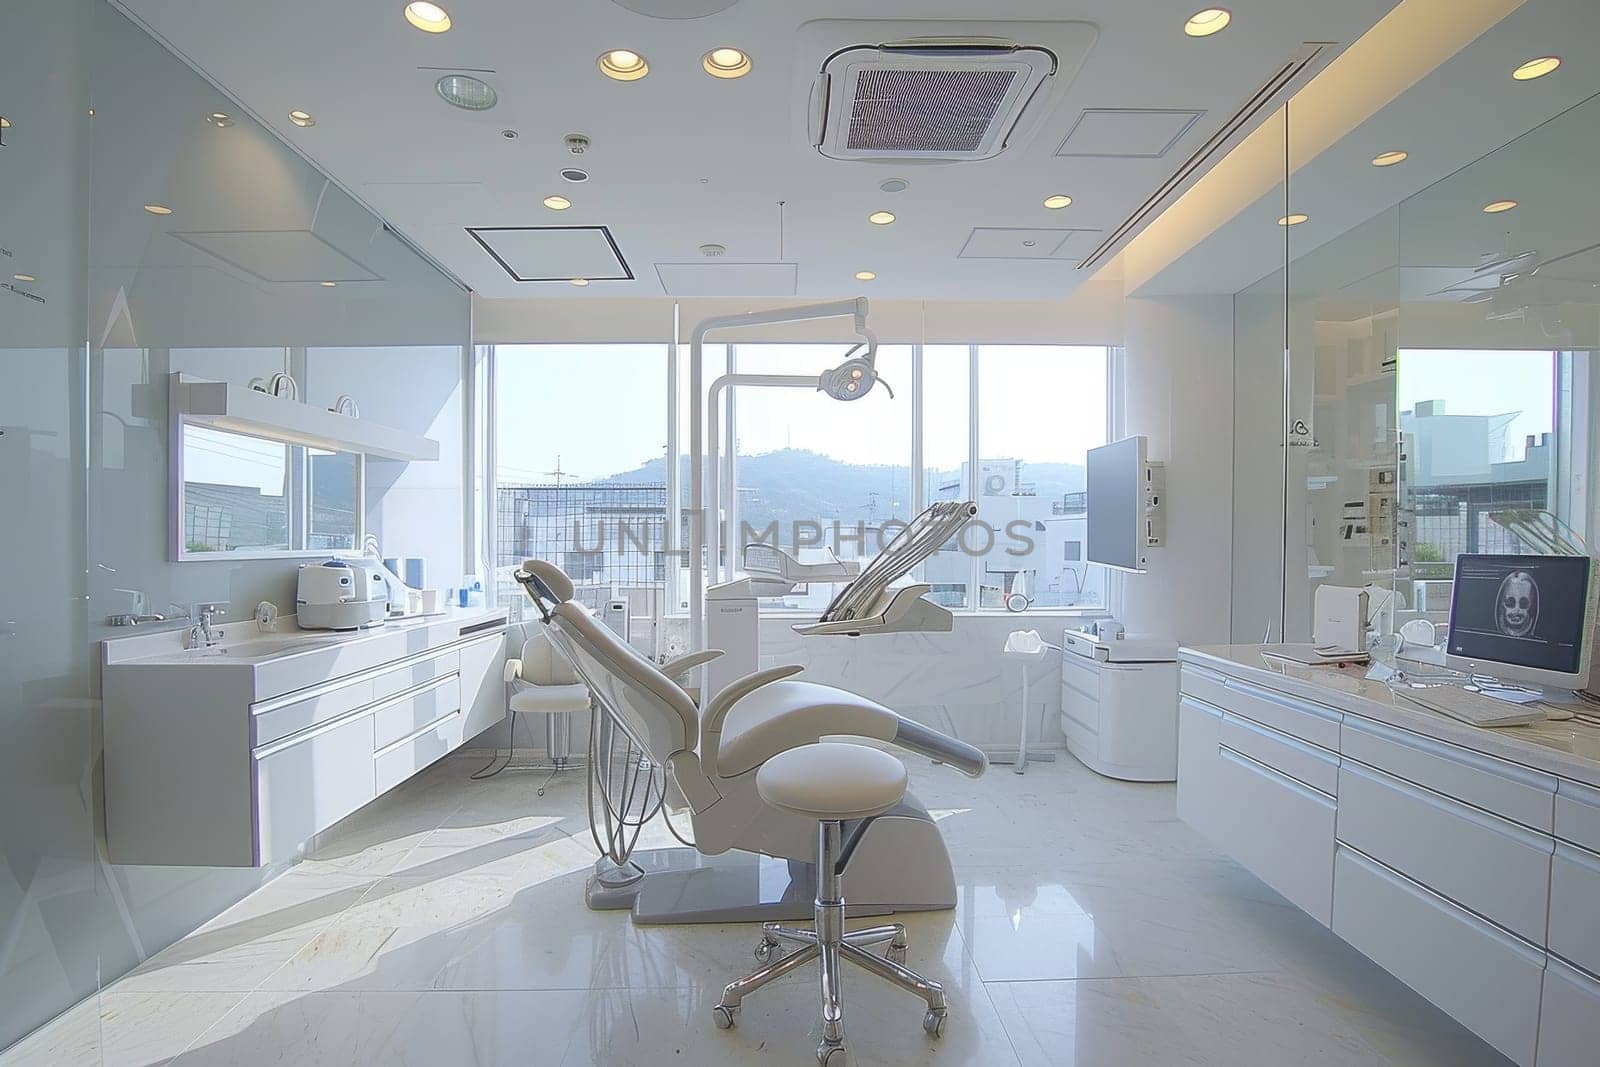 A clean and sterile dental office with a large window overlooking a mountain by itchaznong